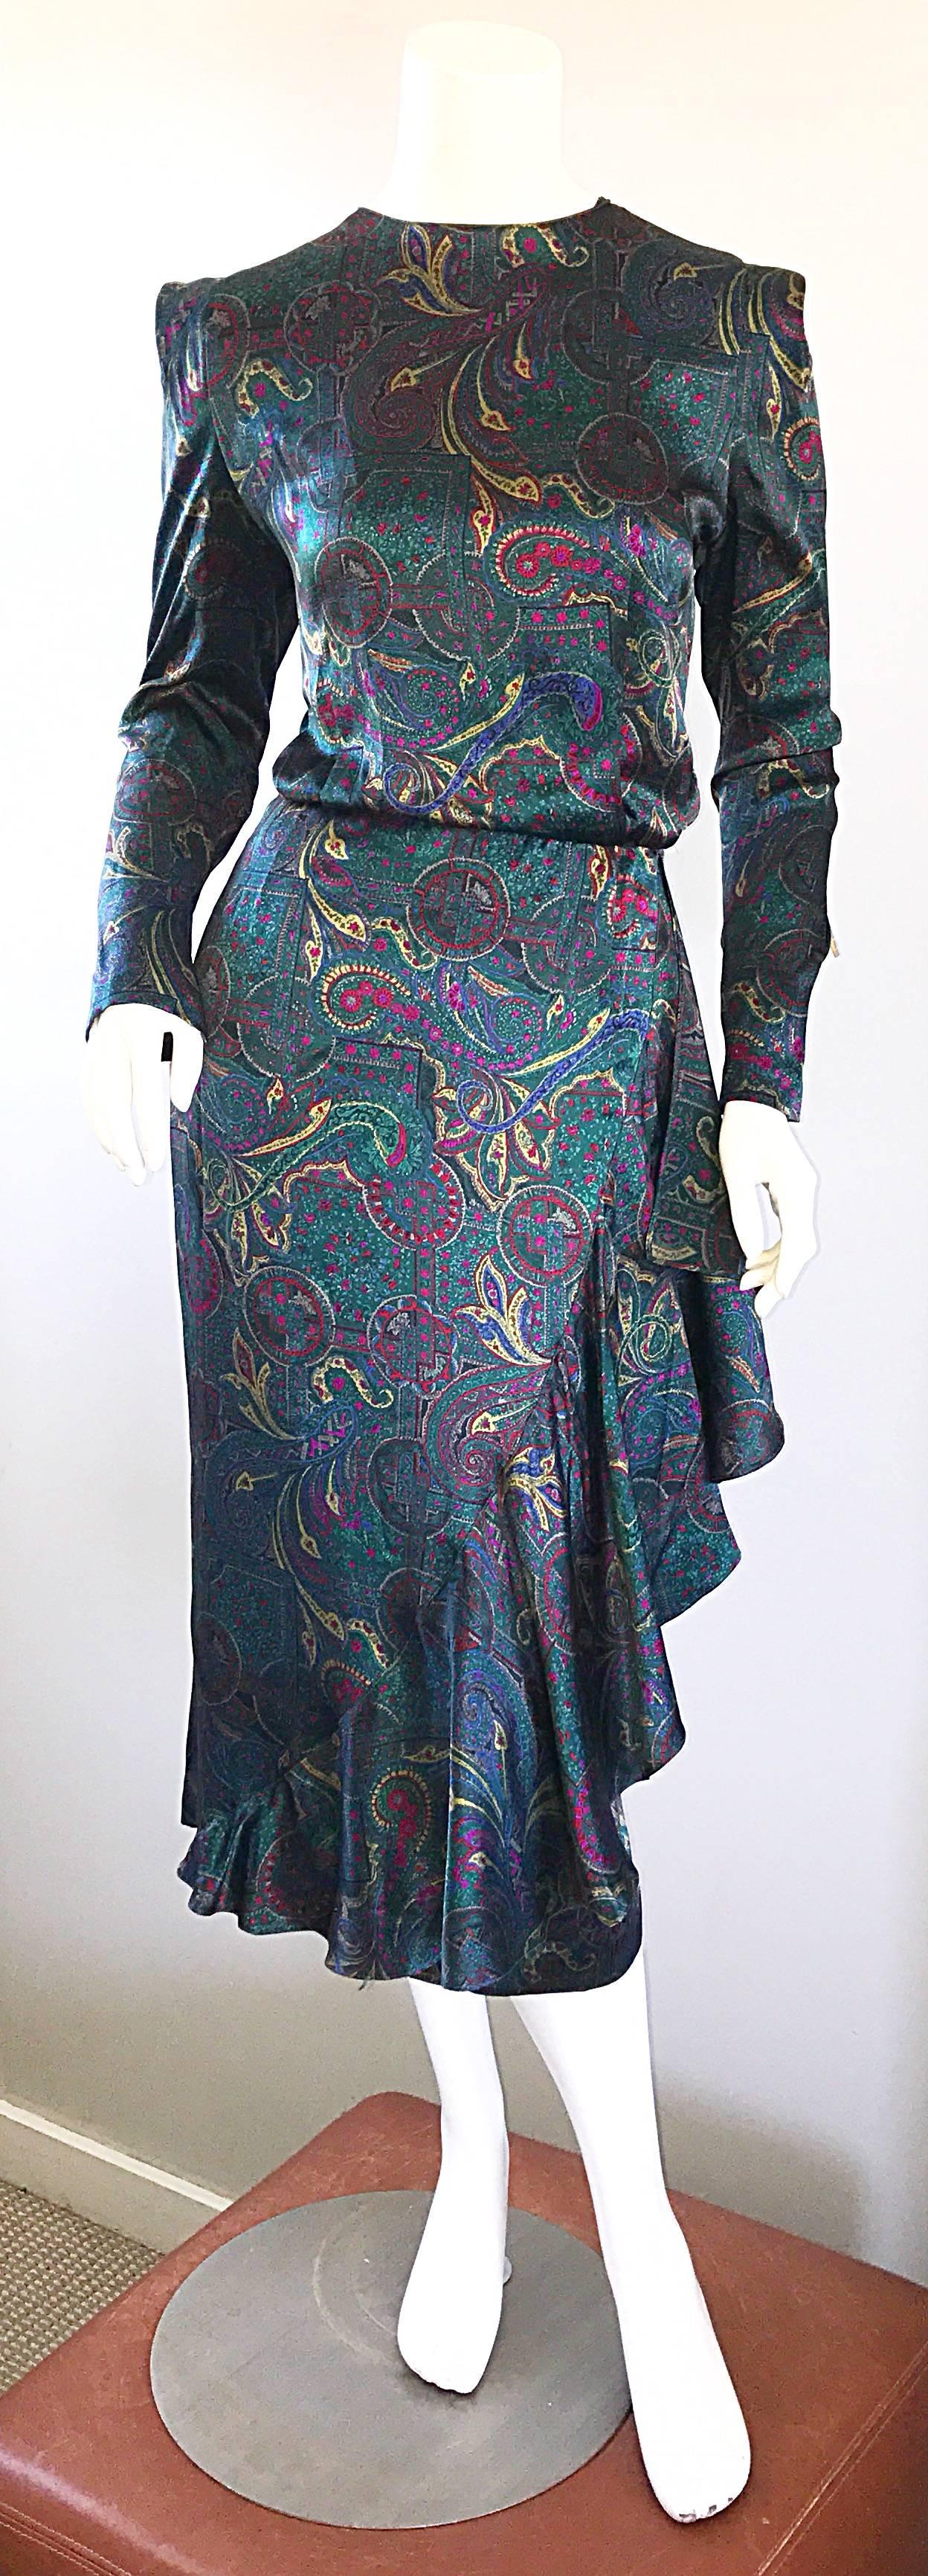 Pretty vintage LOUIS FERAUD emerald jewel tone long sleeve silk dress! Features fantastic paisley prints in emerald green, fuchsia pink, blue, and yellow. Sleek slim bodice with a flamenco style skirt that features an oversided ruffle down the left